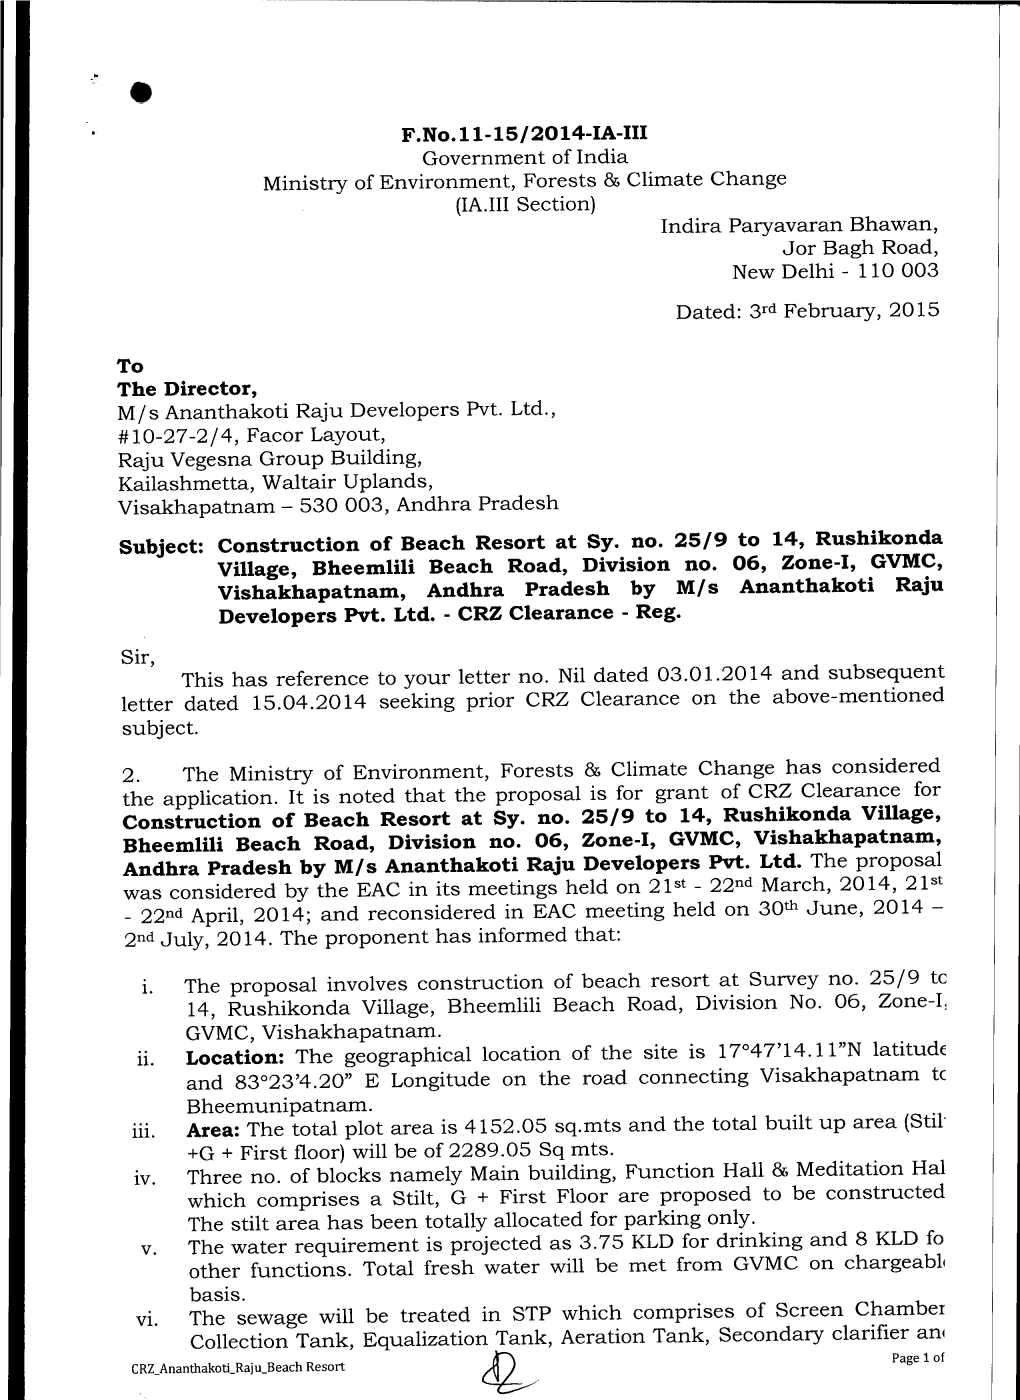 F.No.II-15/2014-IA-III Government of India Ministry Ofenvironment, Forests & Climate Change (IA.Iiisection) Indira Paryavara